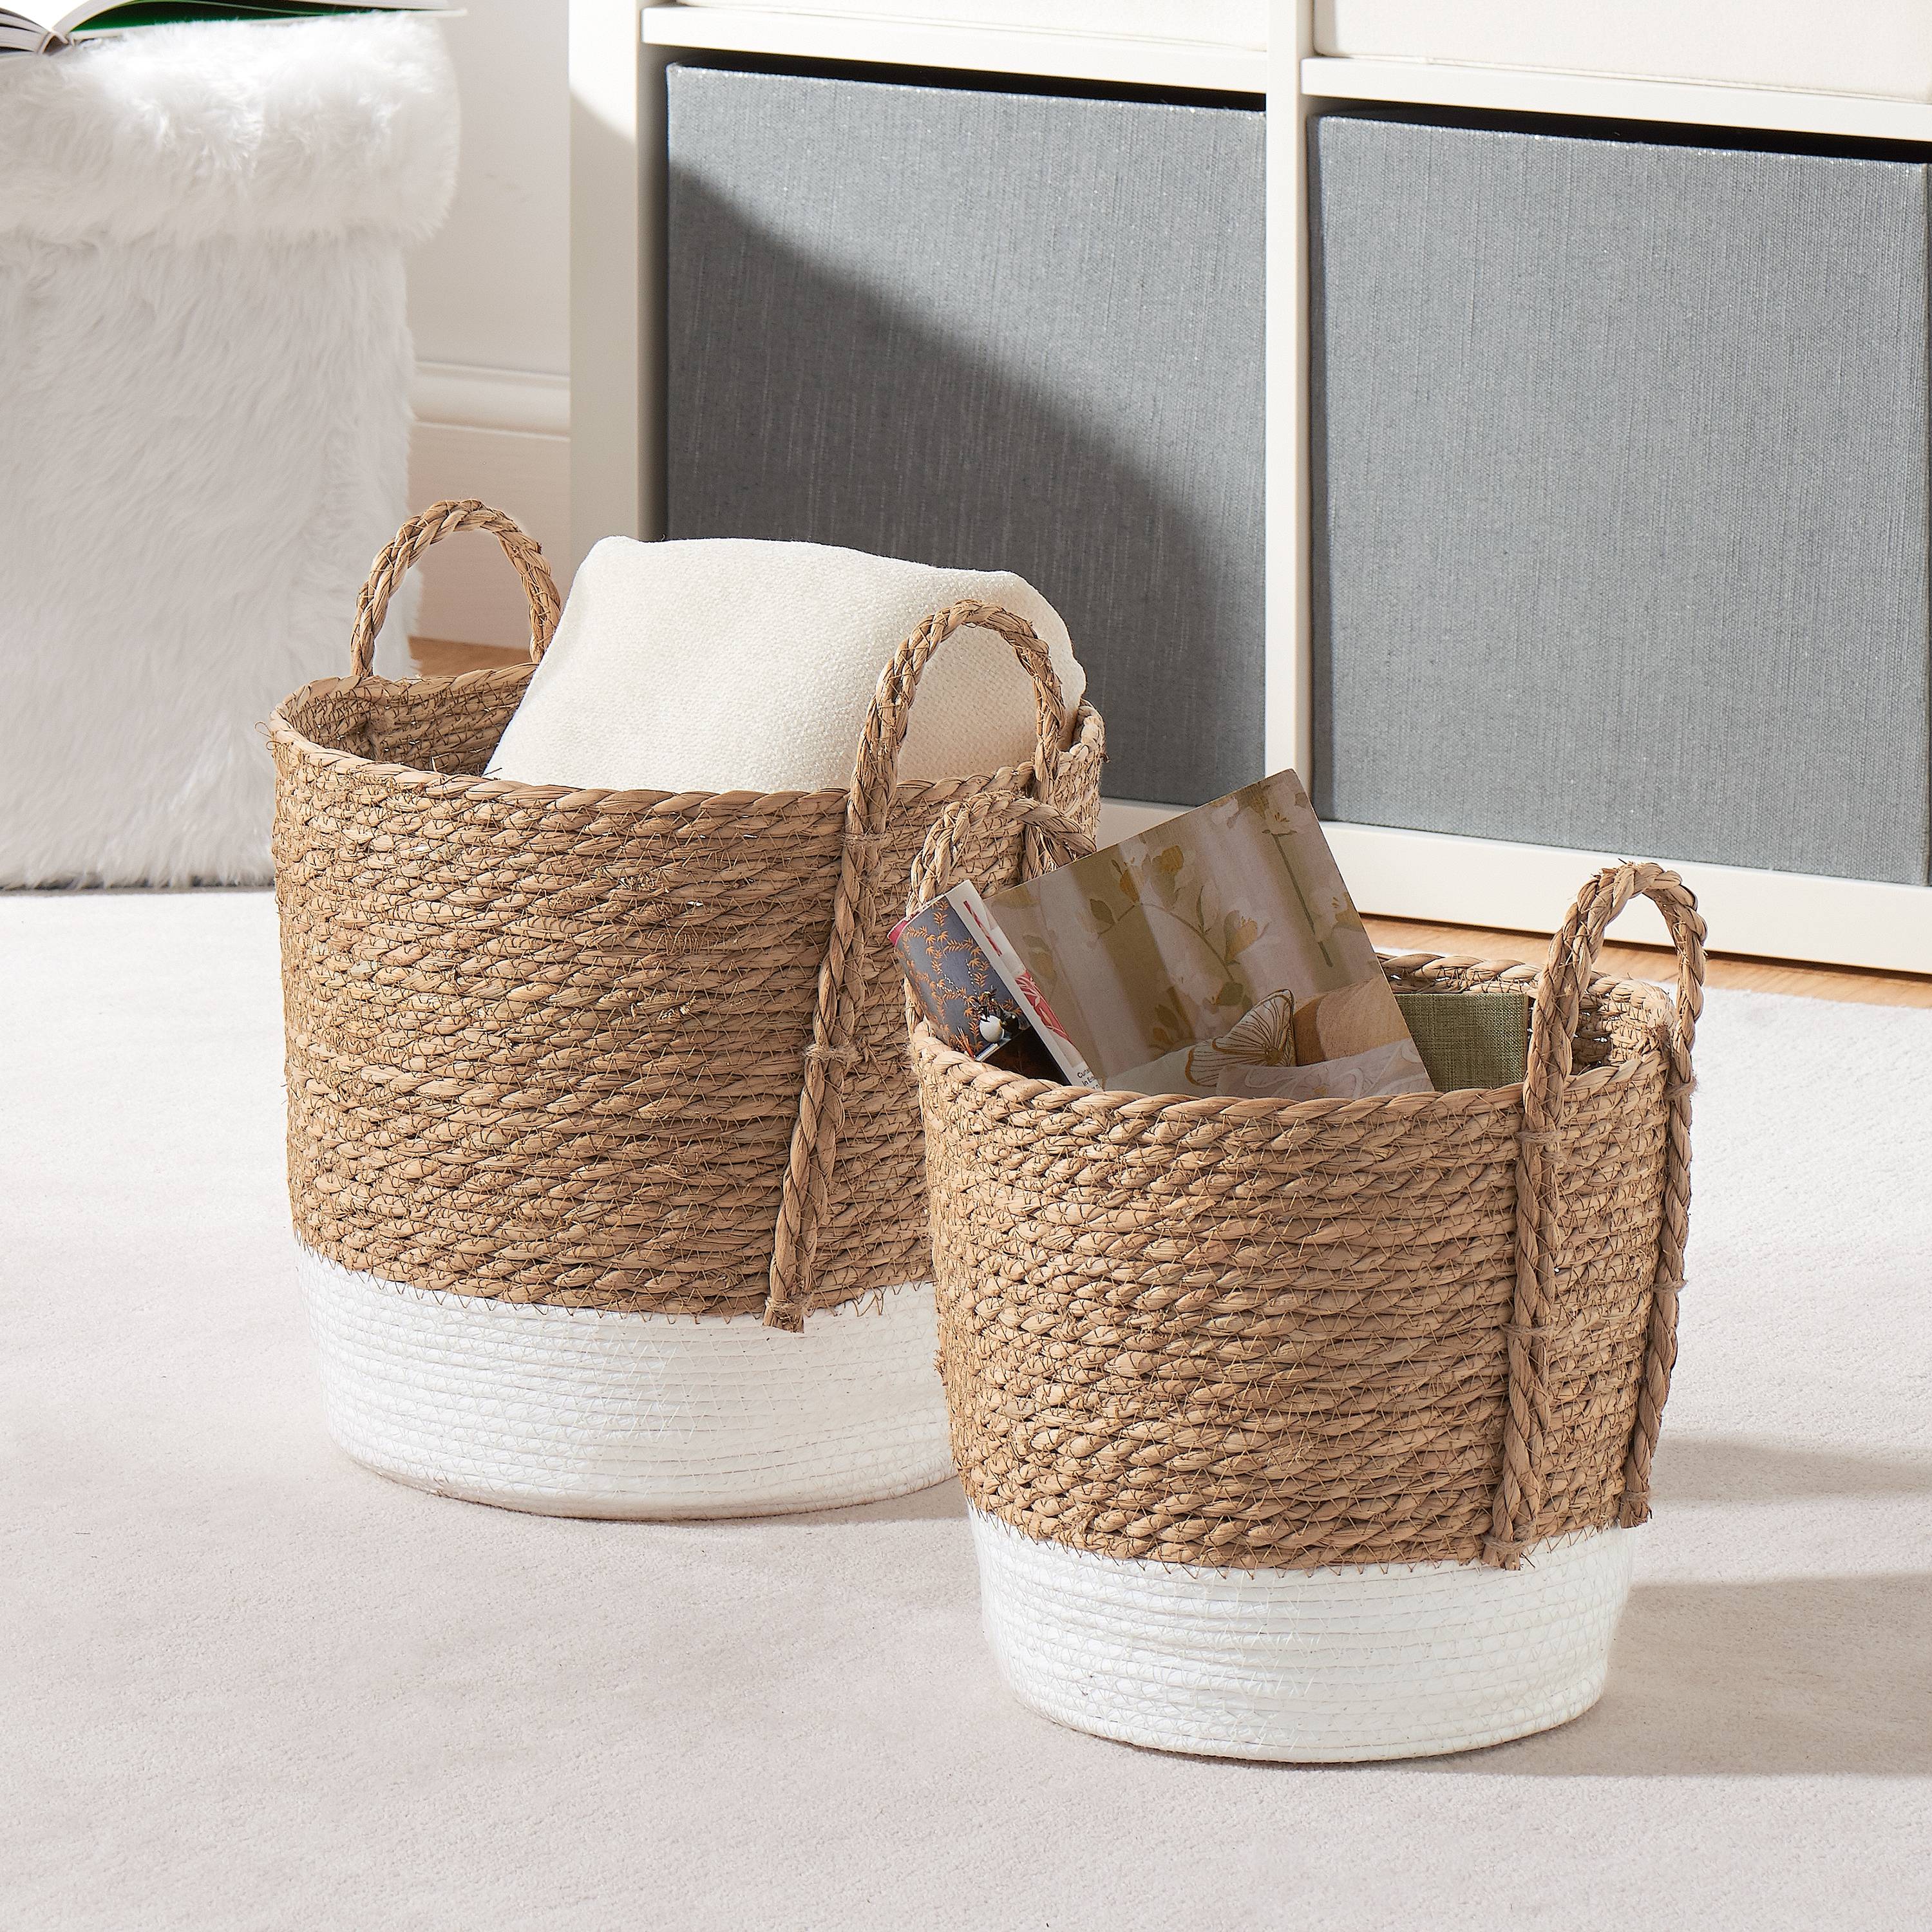 Mainstays Seagrass & Paper Rope Baskets, Set of 2, Small and Medium, Storage - image 3 of 6